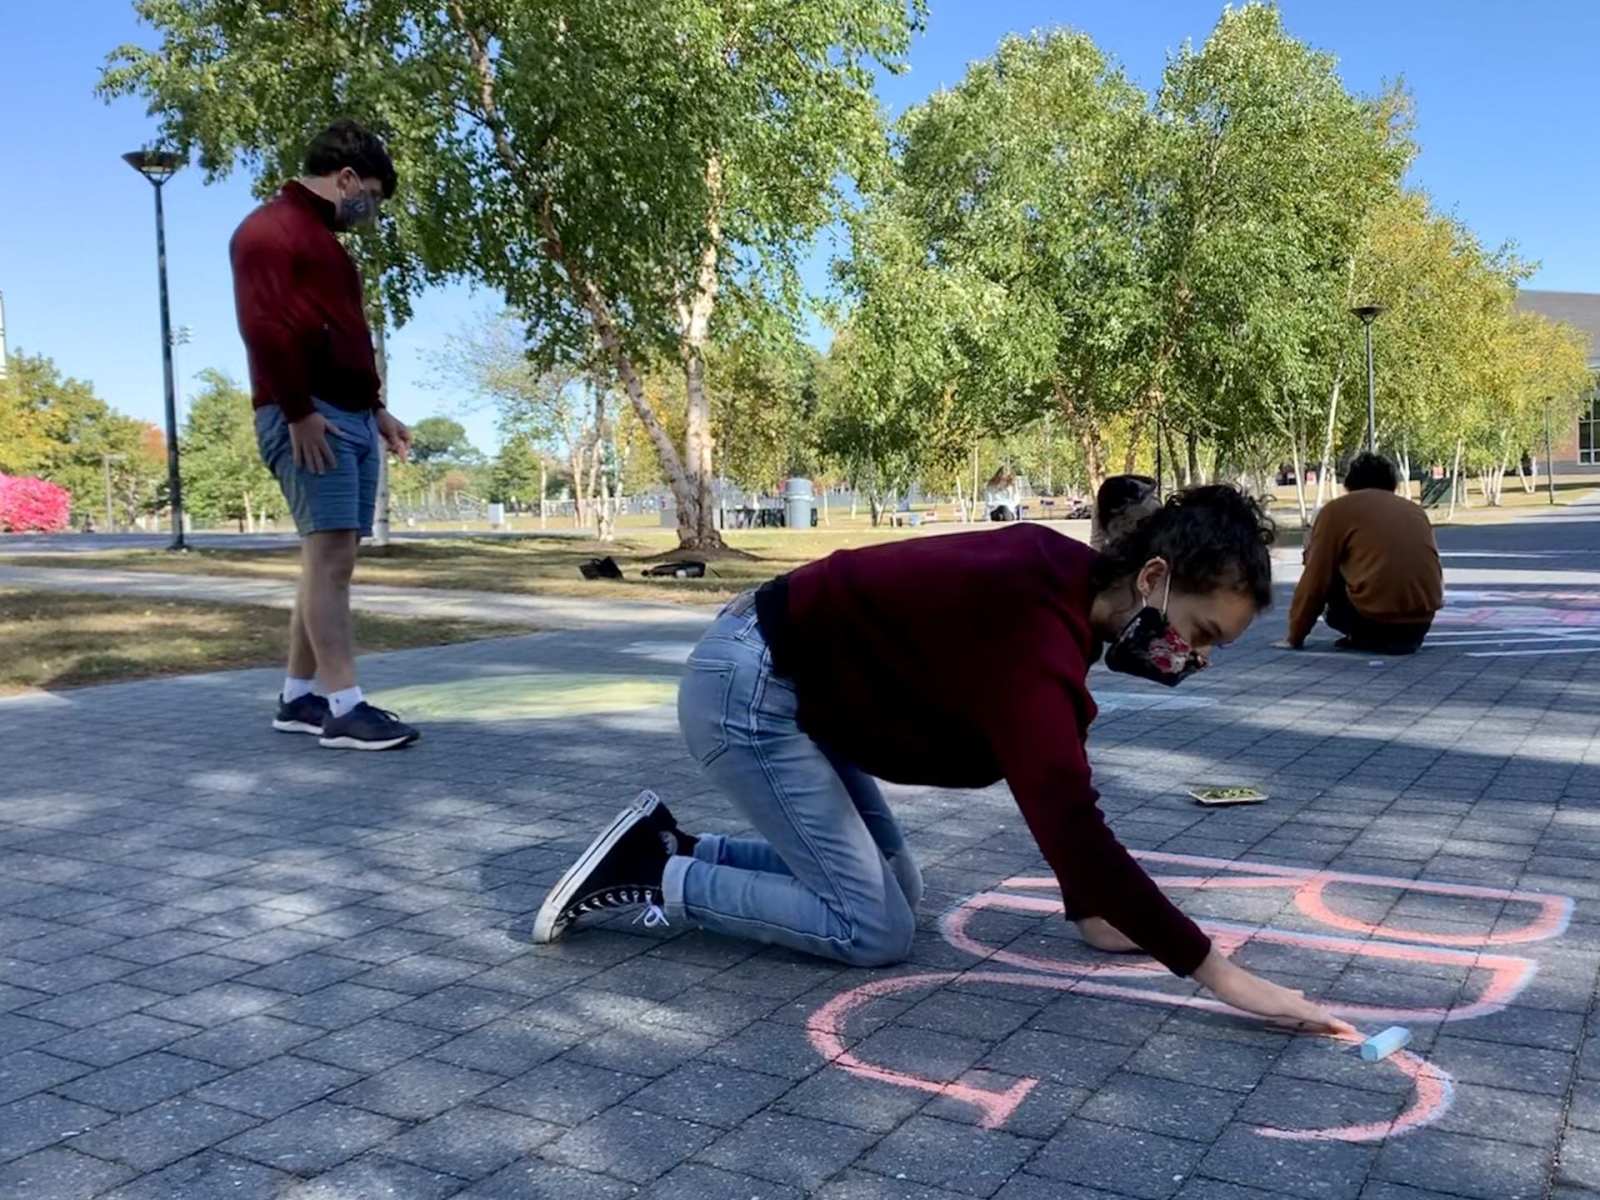 Olivia Eaton, a student majoring in classical medieval studies and minoring in gender studies at Bates College, on Saturday crafts a sidewalk chalk mural on the campus in Lewiston, Maine, honoring U.S. Supreme Court Justice Ruth Bader Ginsburg after her death the day prior.